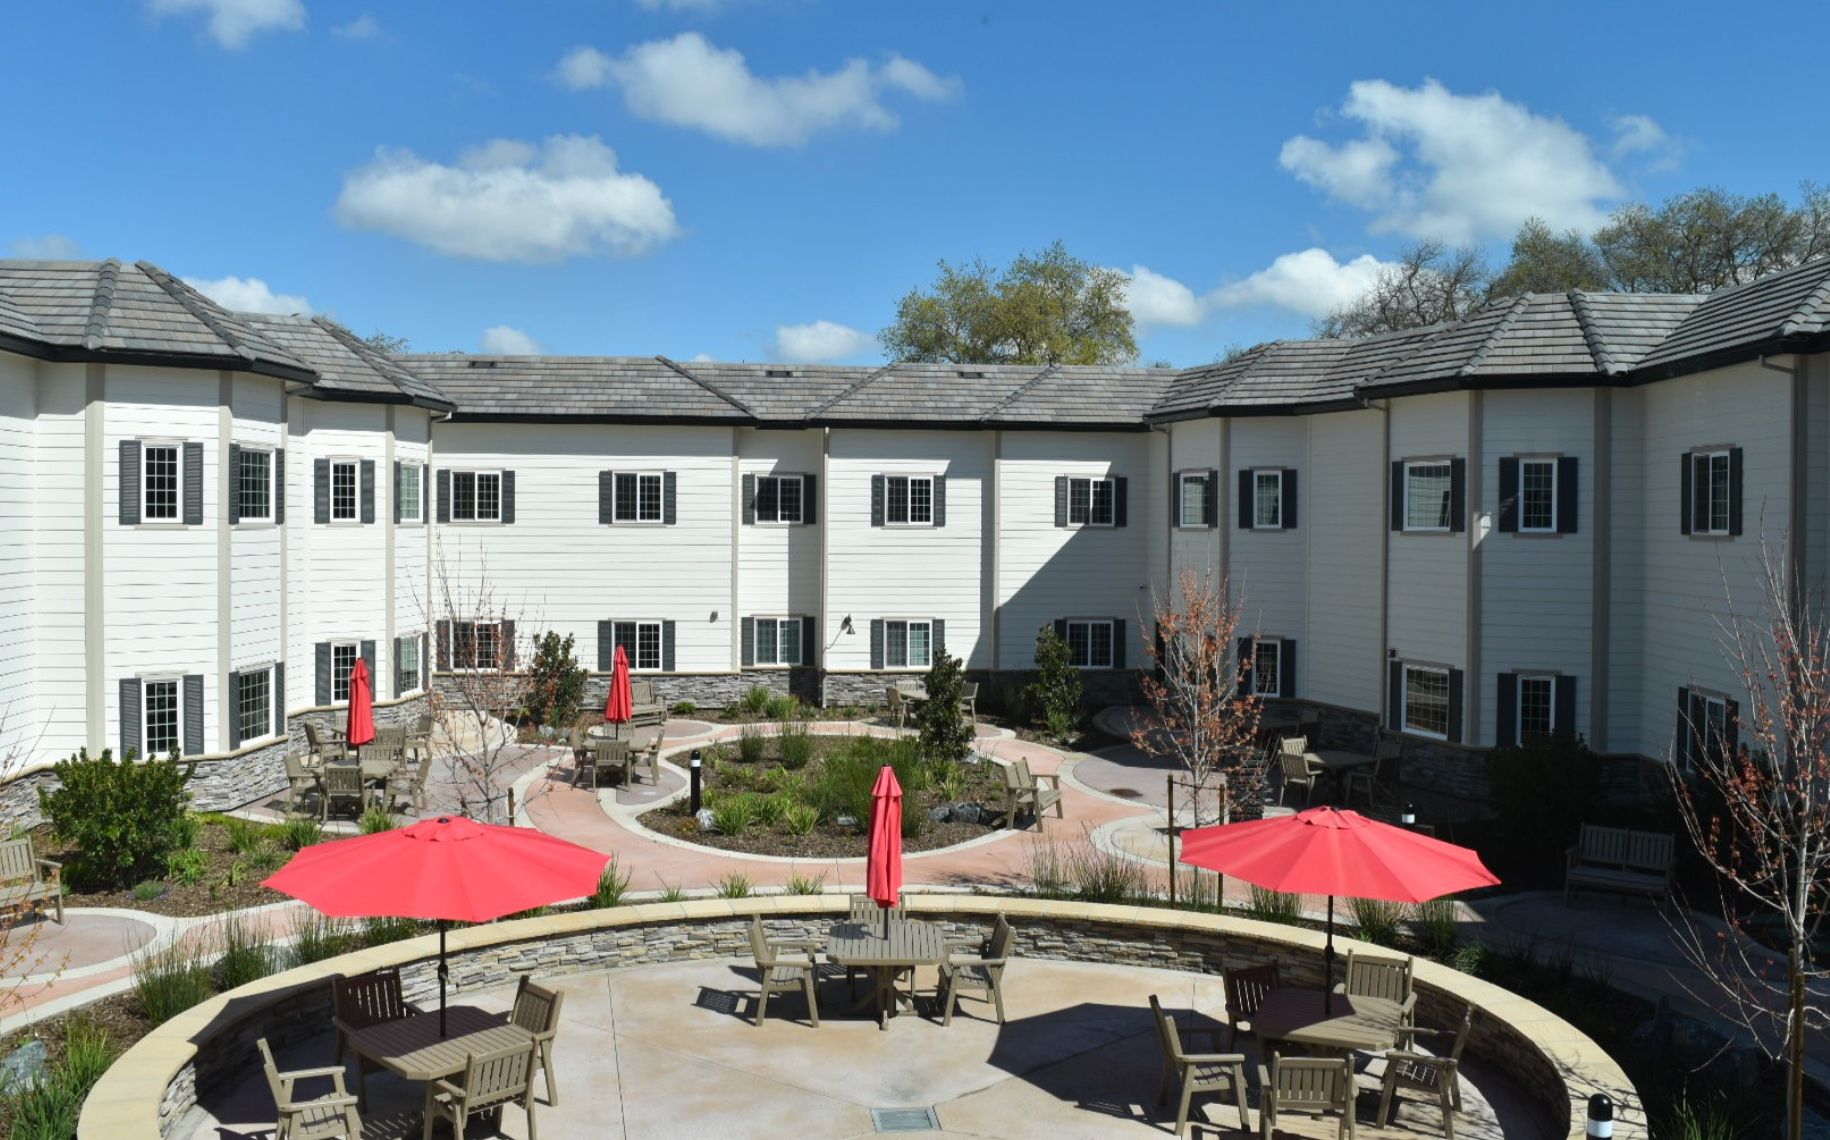 Courtyard view of the exterior